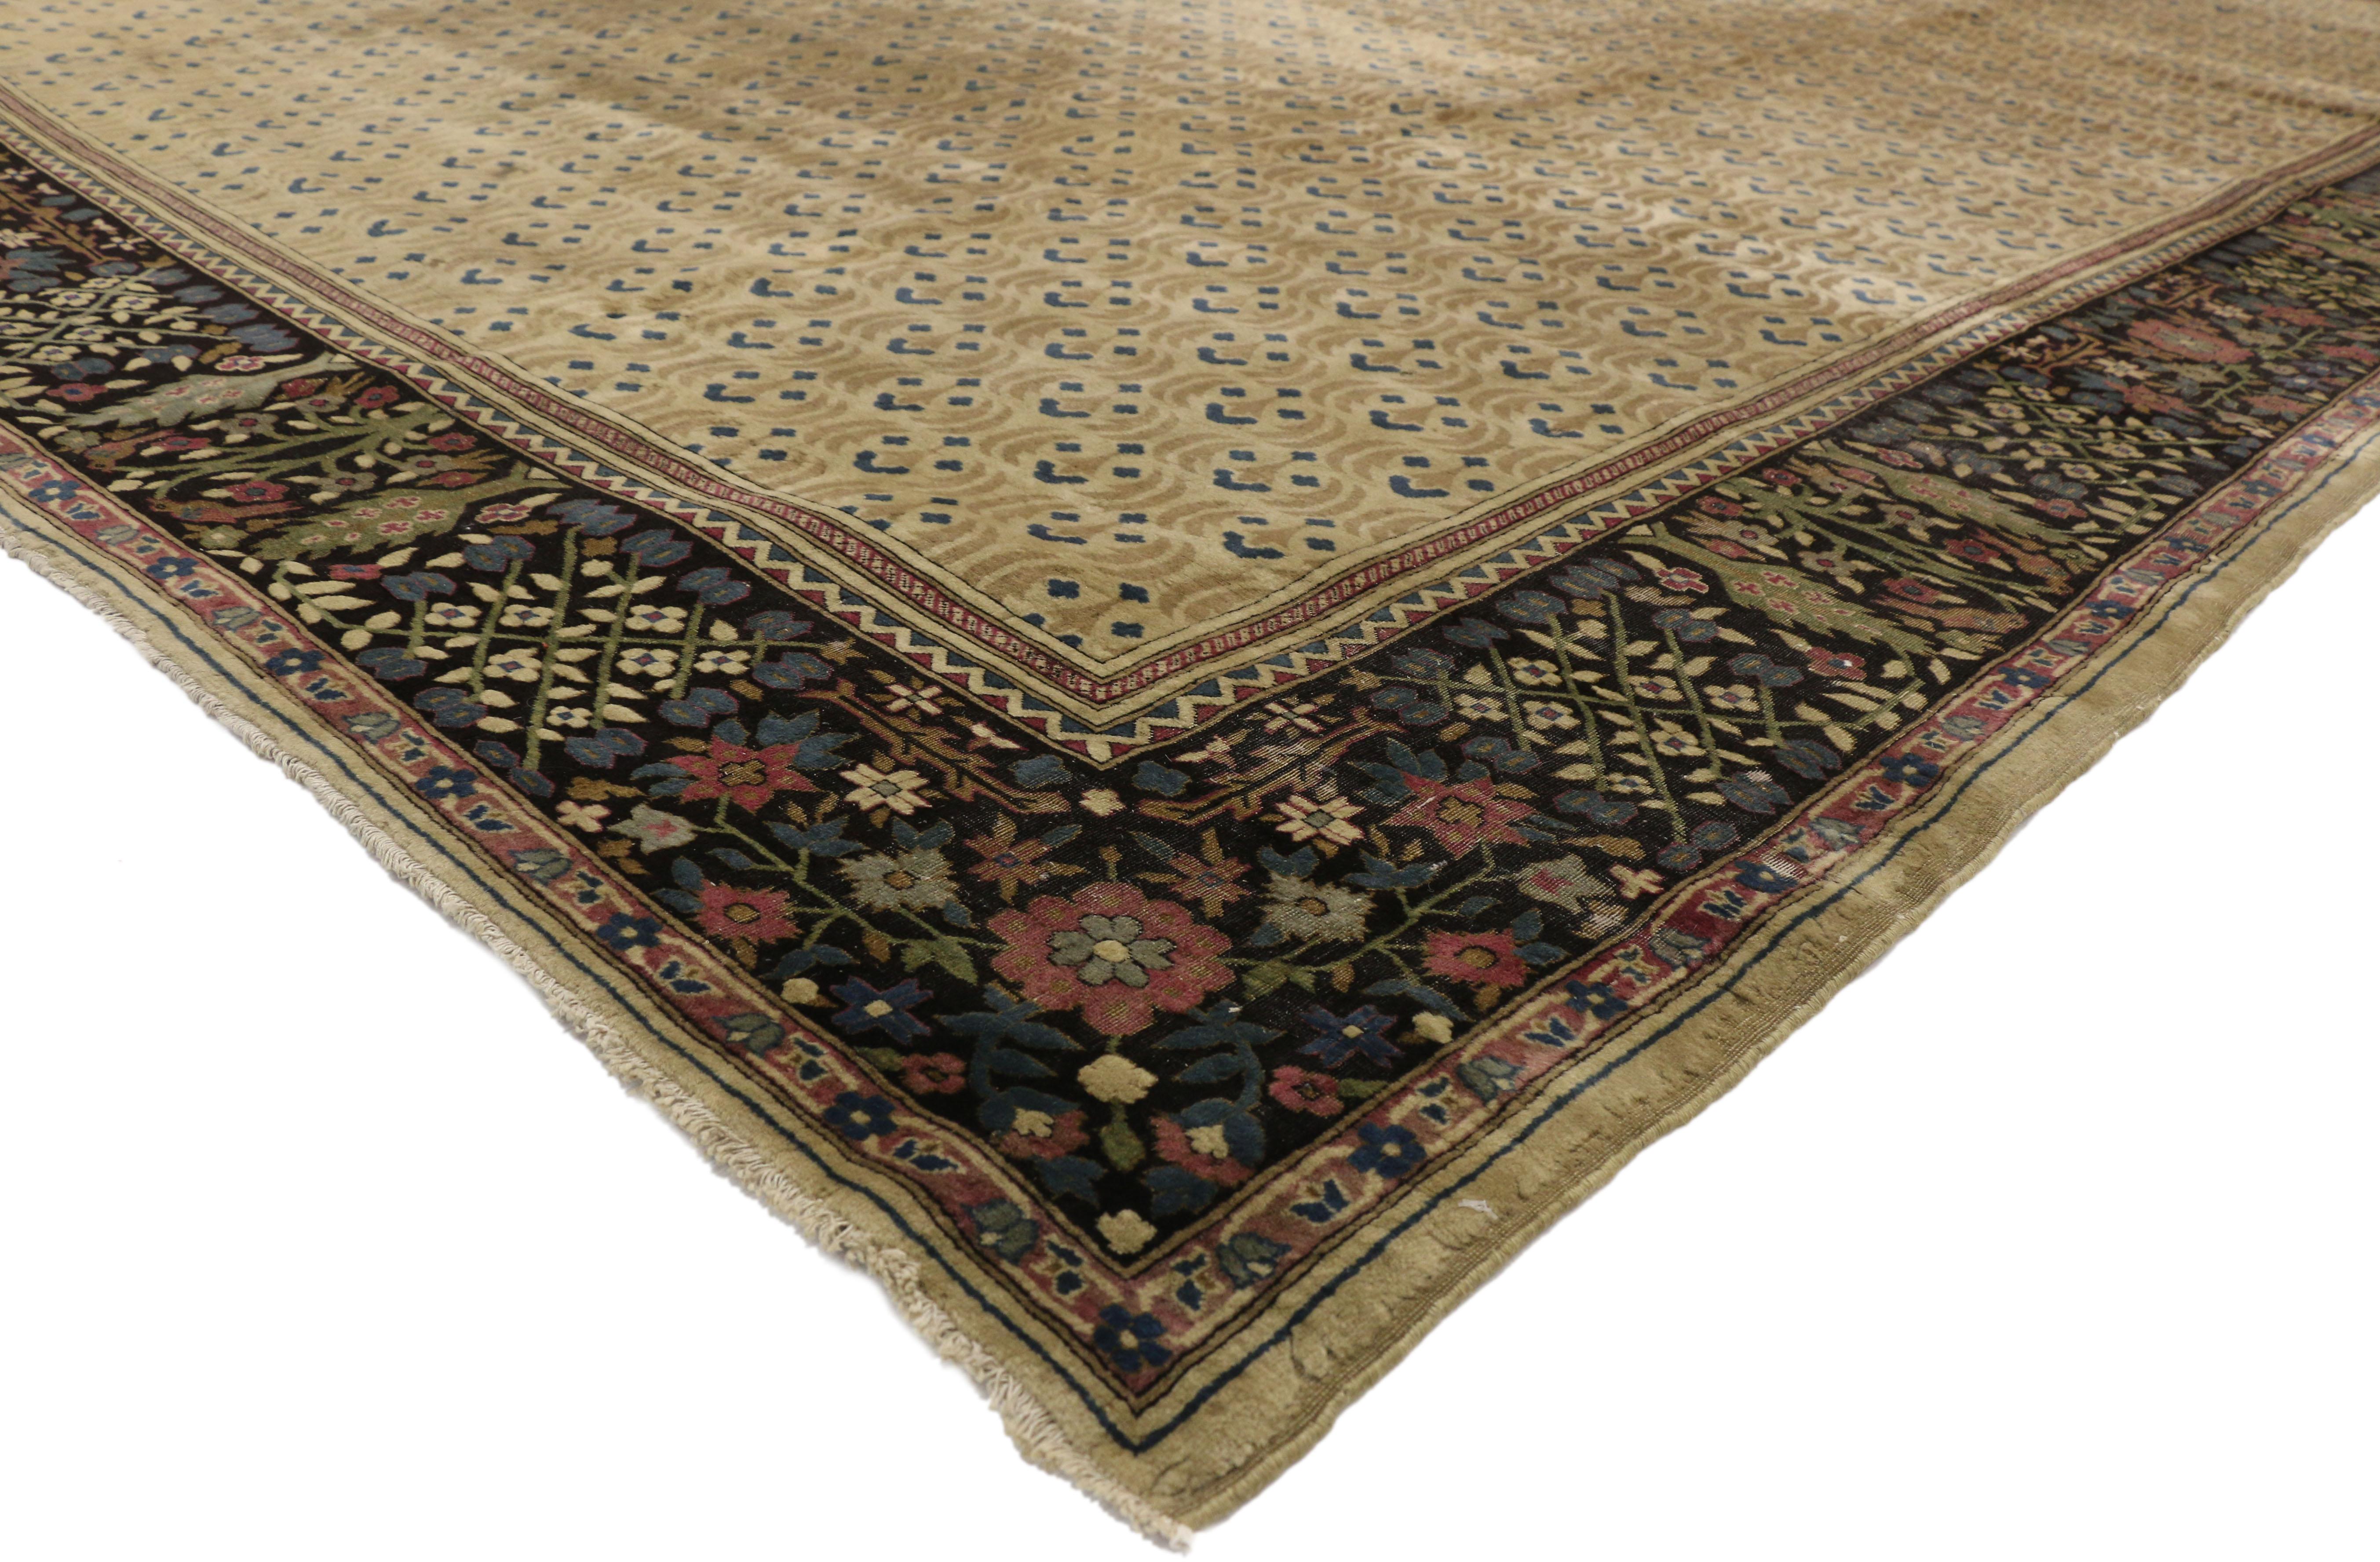 73986 Late 19th Century Antique Indian Agra Rug with Art Deco Style. Cleverly composed and distinctively well-balanced, this hand-knotted wool antique Indian Agra features an all-over repeating pattern similar to the ancient Chintamani pattern